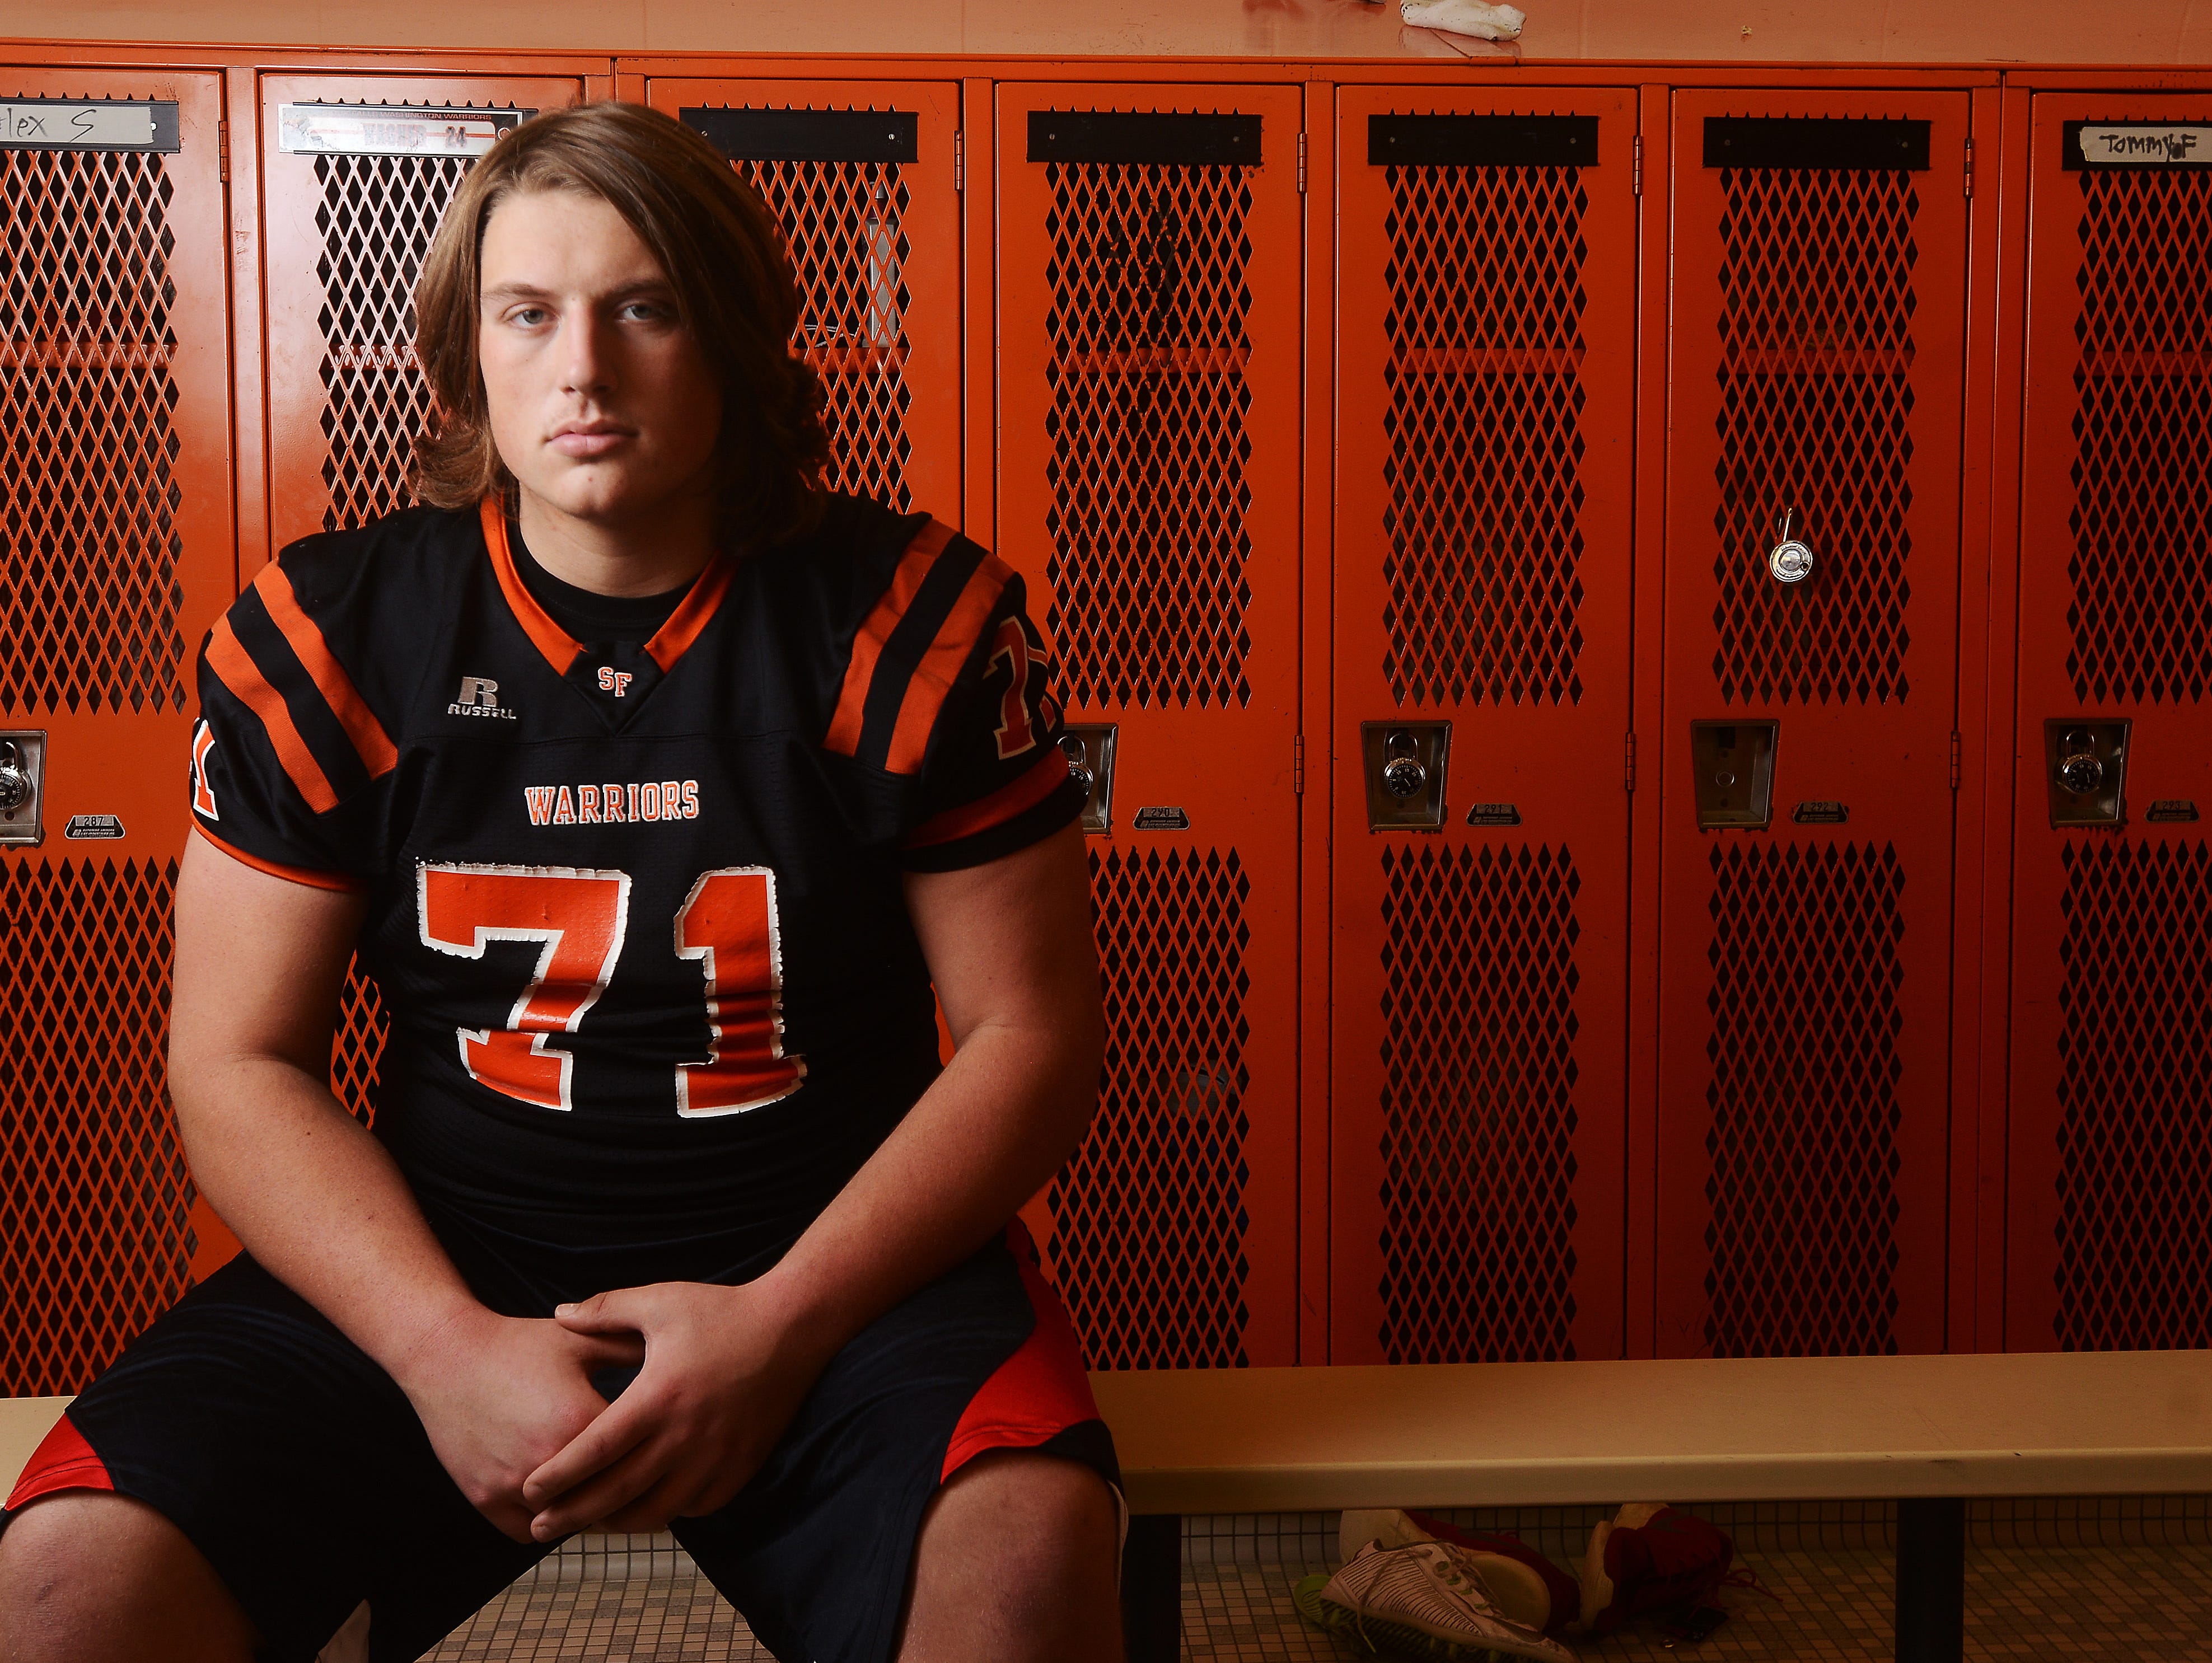 Matt Farniok helped lead the Washington Warriors to the state title. He's one of the most coveted offensive linemen in the region and has yet to decide his college choice.